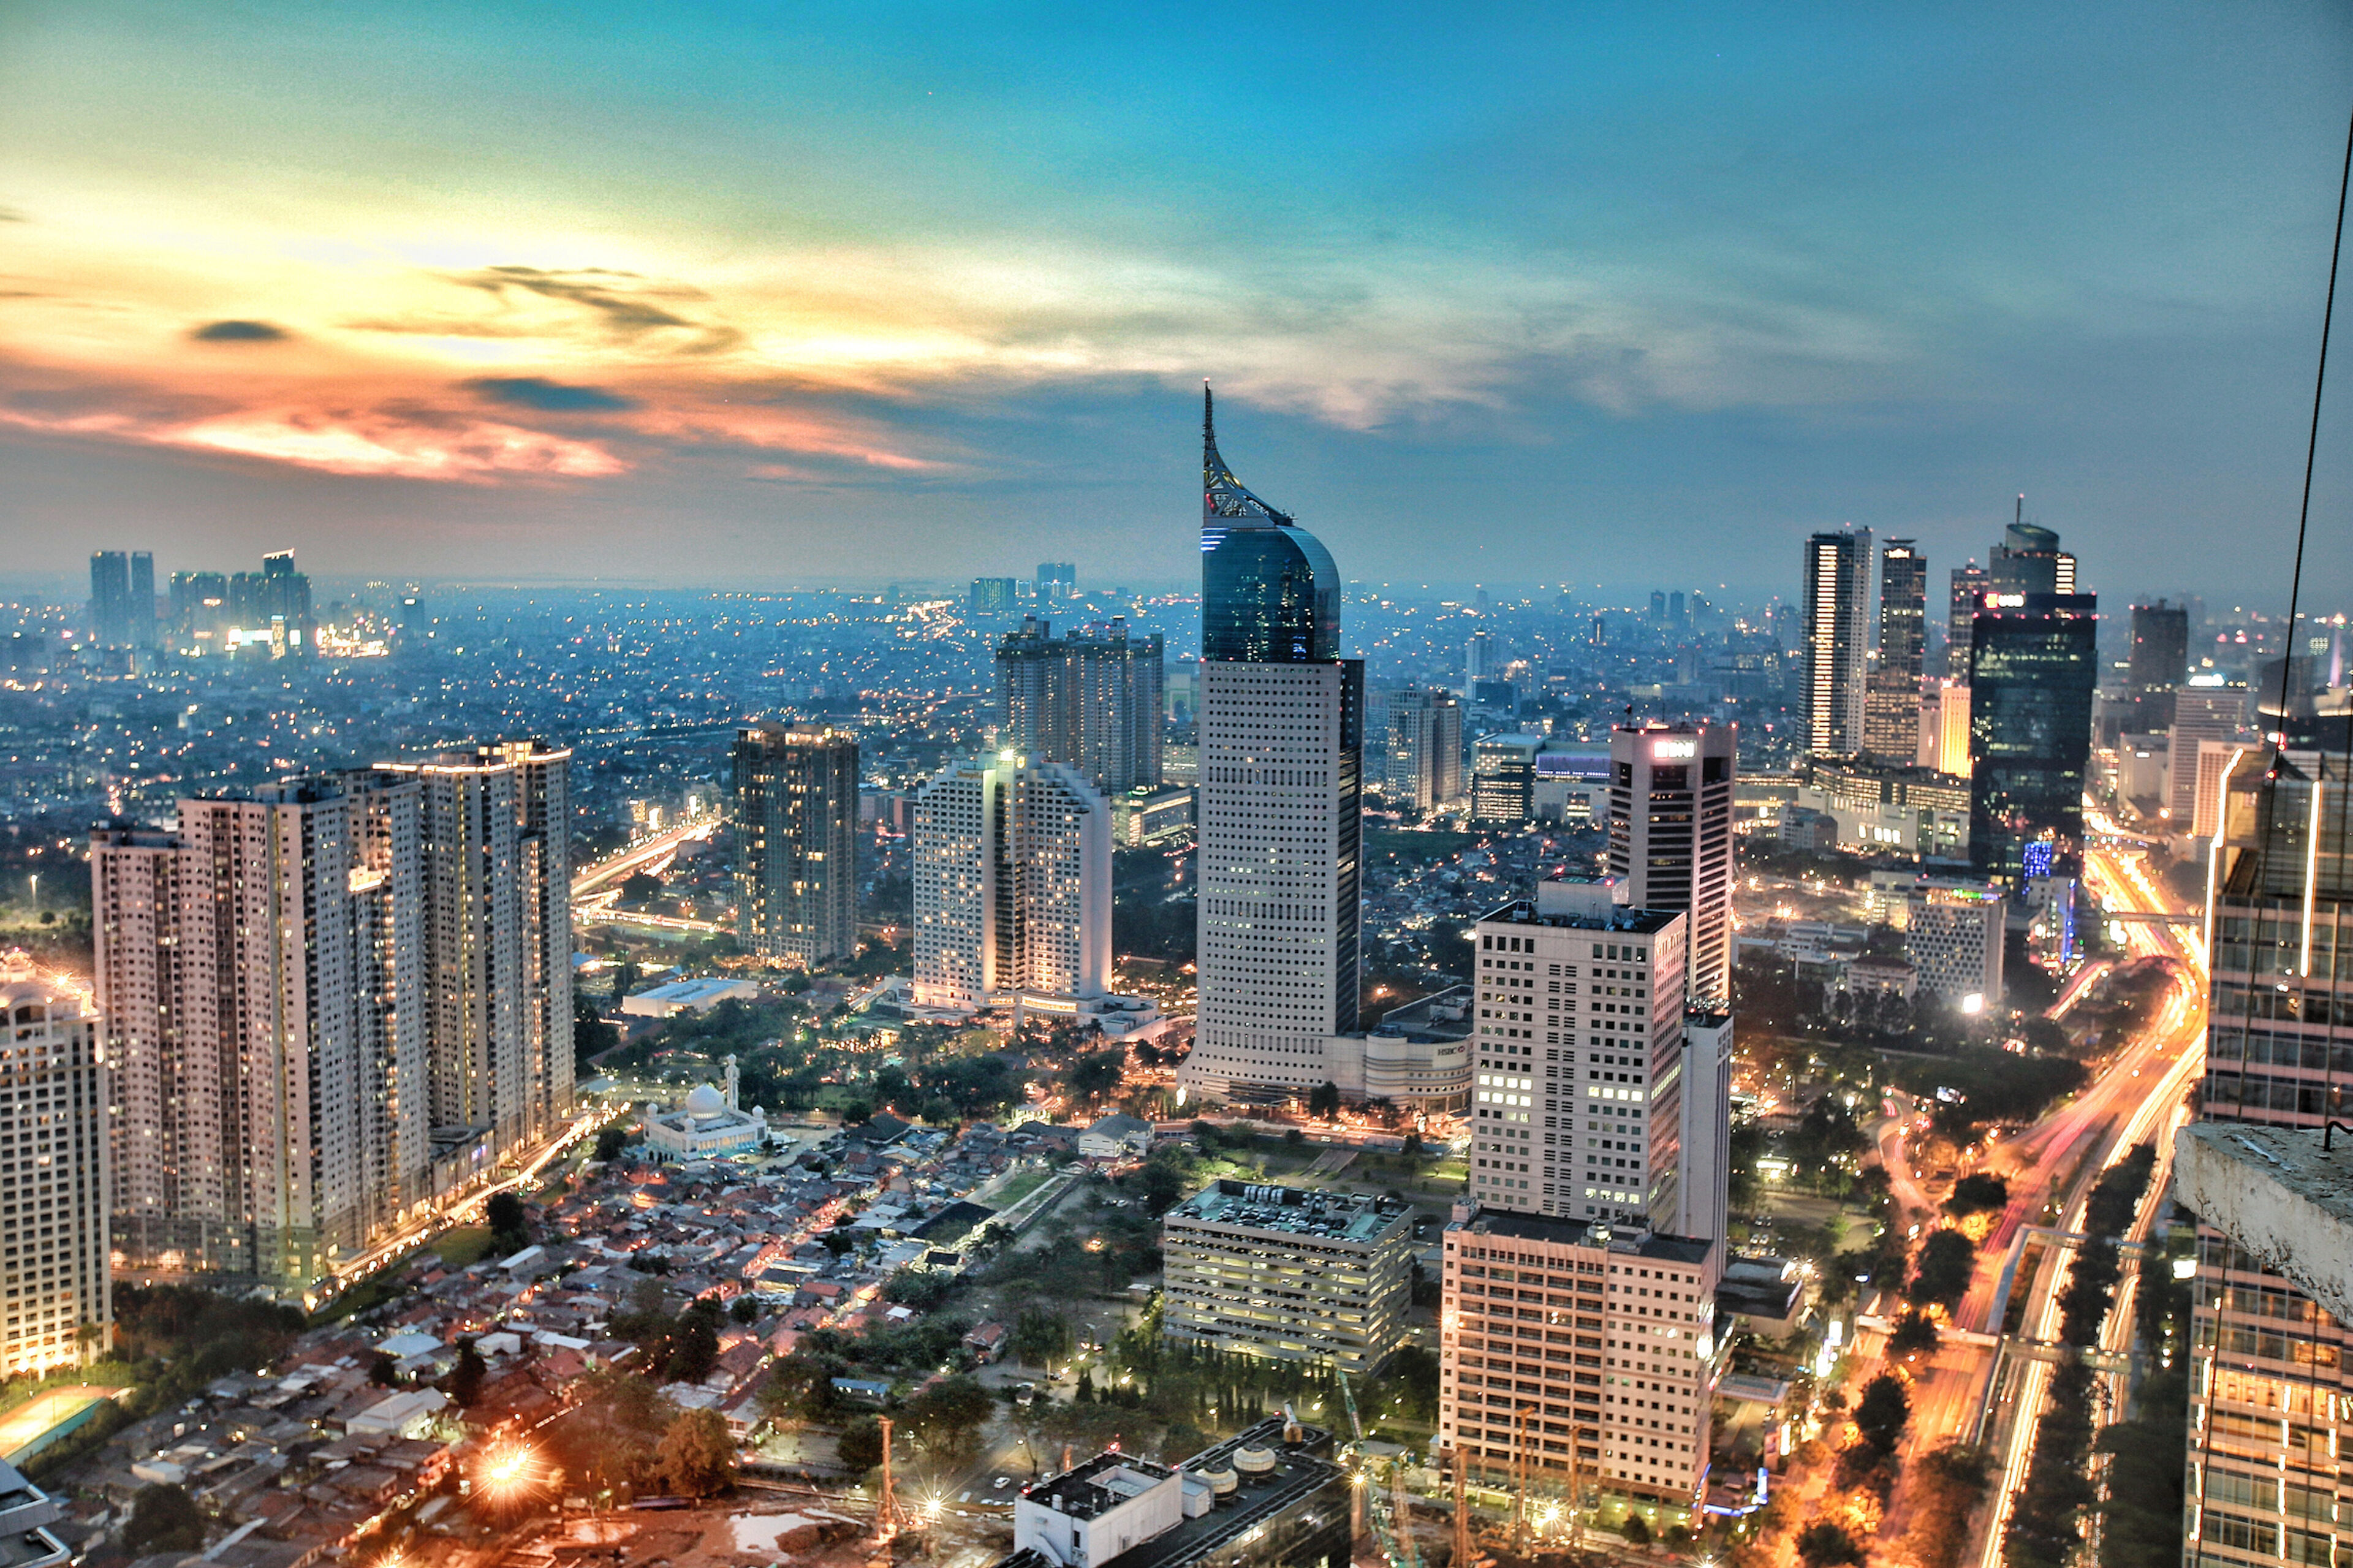 The skyline of Jakarta during twilight with illuminated skyscrapers and a vibrant sunset backdrop.